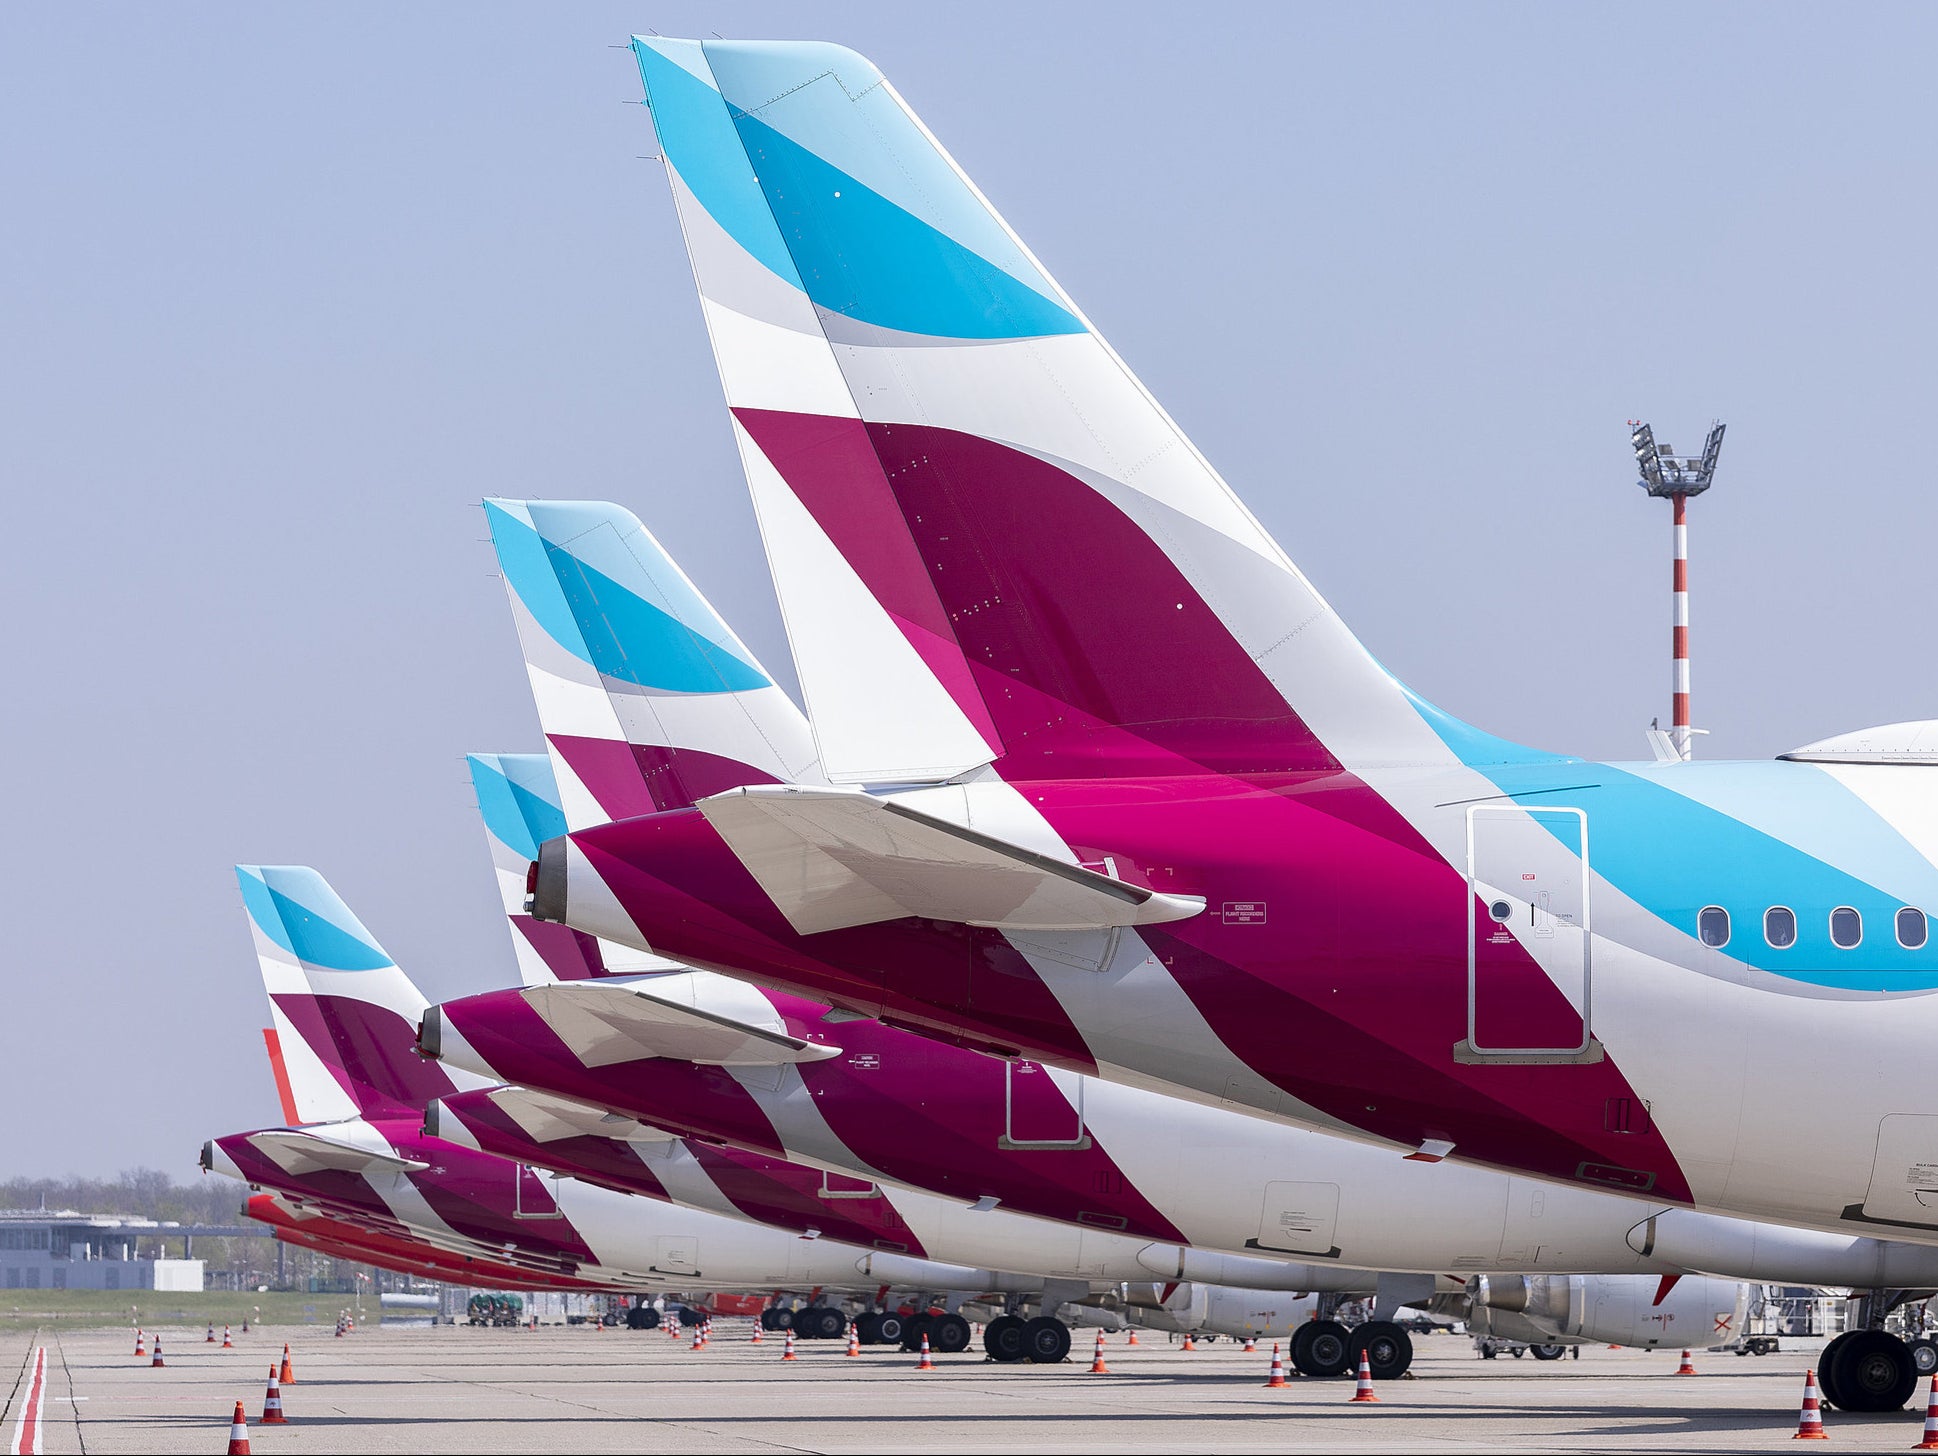 Ground stop: Eurowings aircraft at Dusseldorf airport in Germany